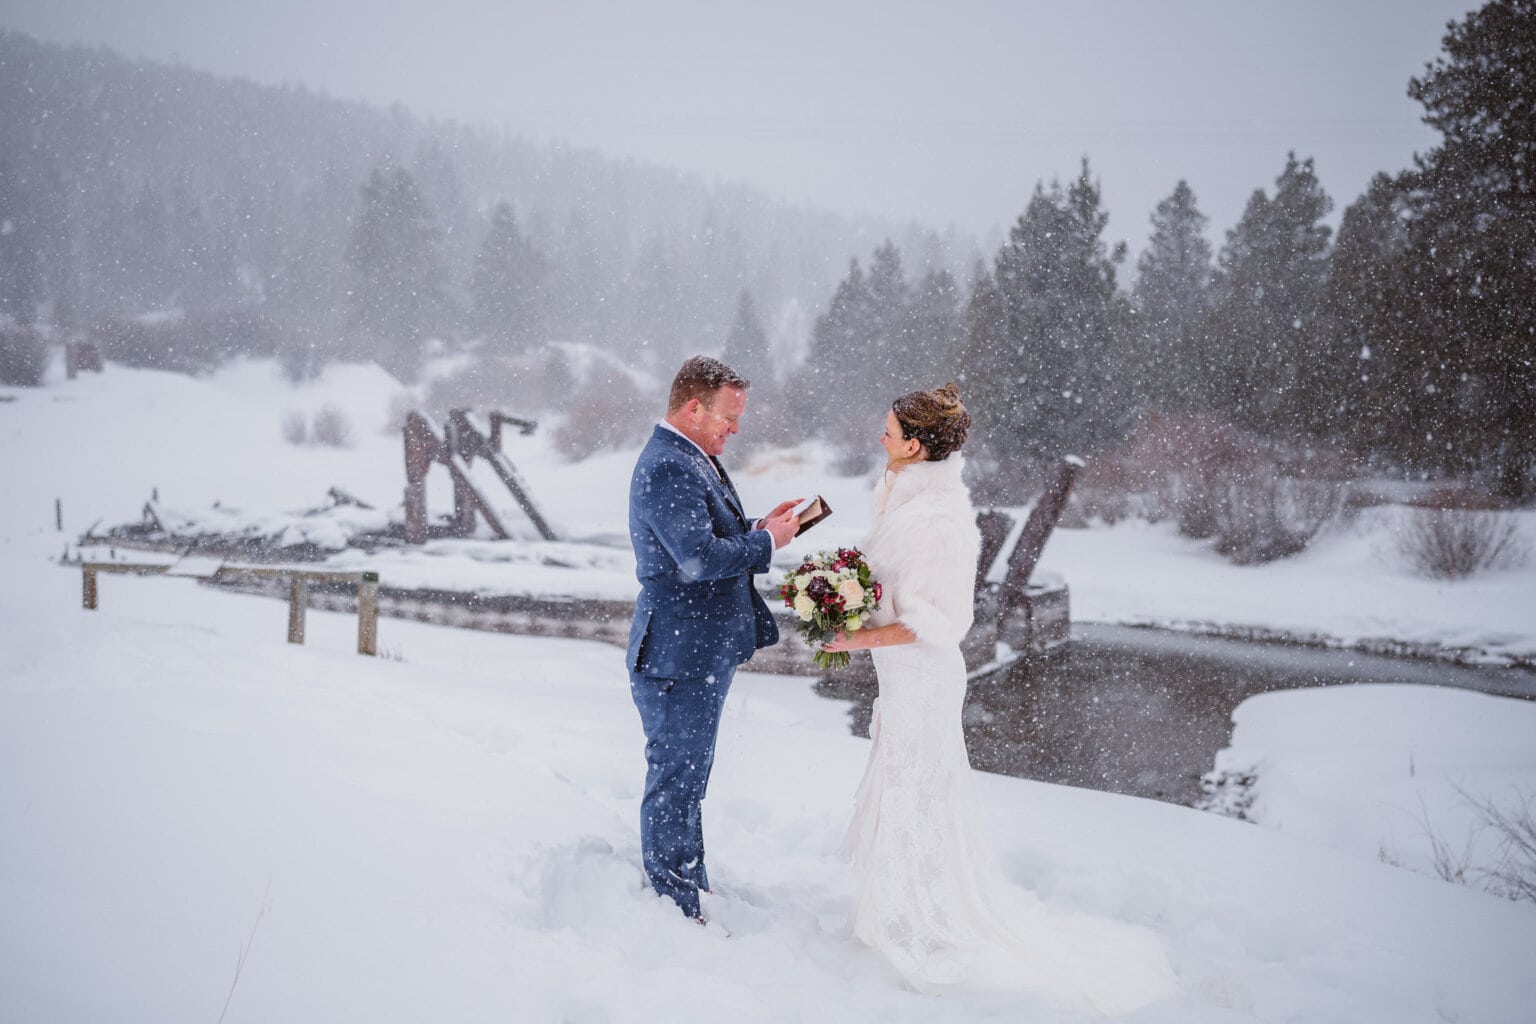 A couple sharing their vows in the snow storm after their Self-Solemnization.